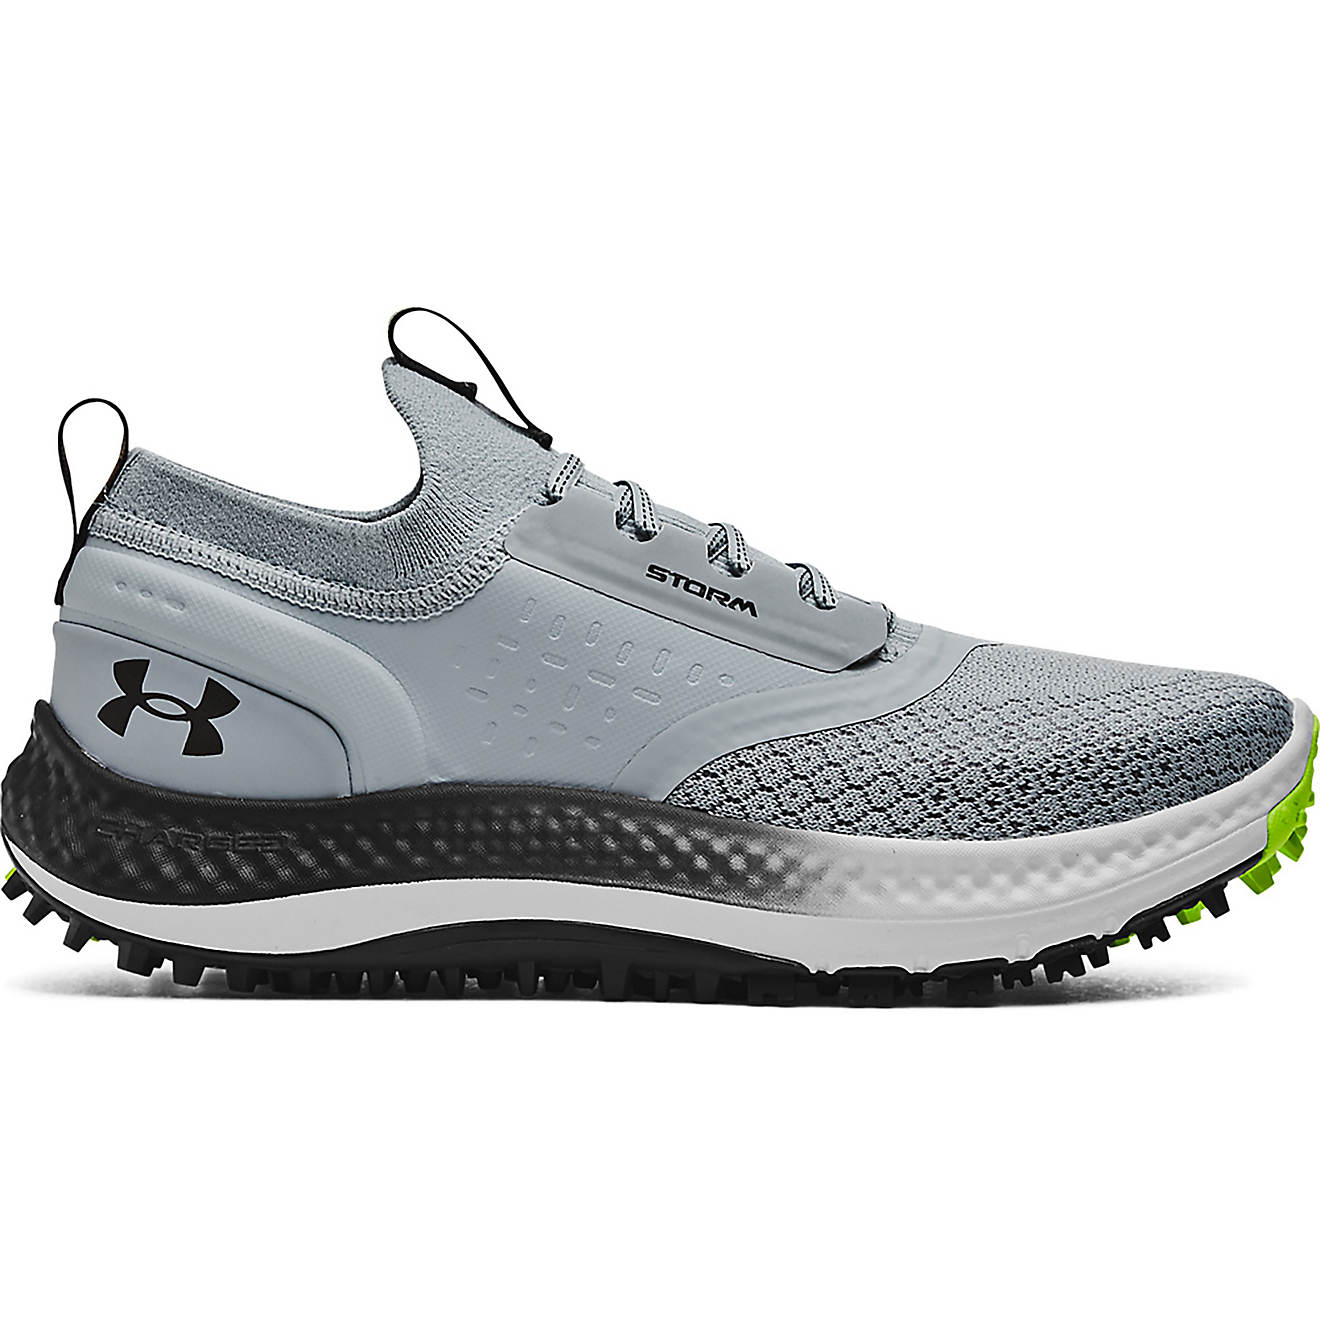 Under Armour Men's Charged Phantom Spikeless Golf Shoes | Academy